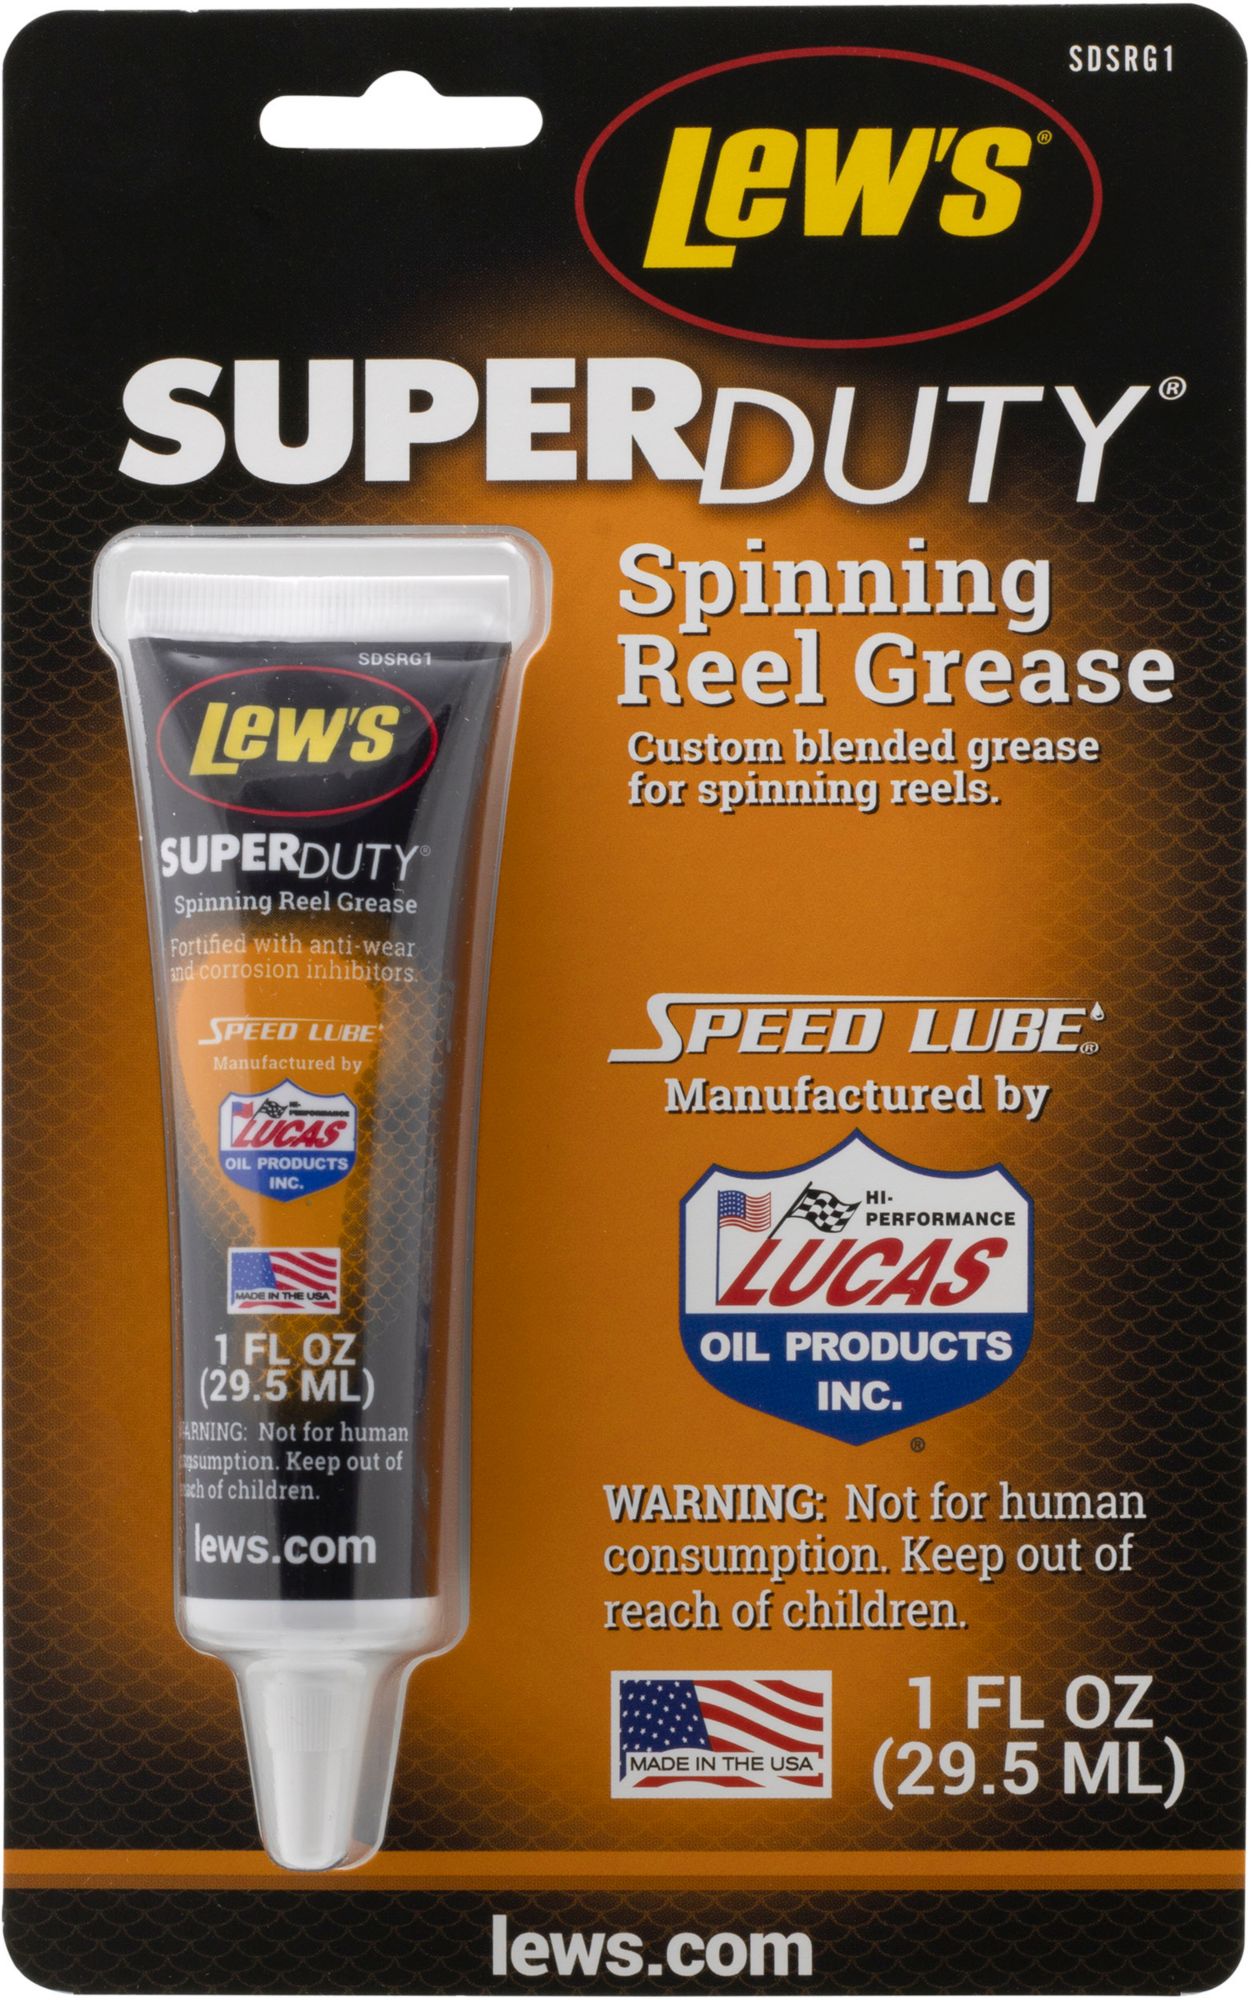 Dick's Sporting Goods Lew's Super Duty Spinning Reel Grease